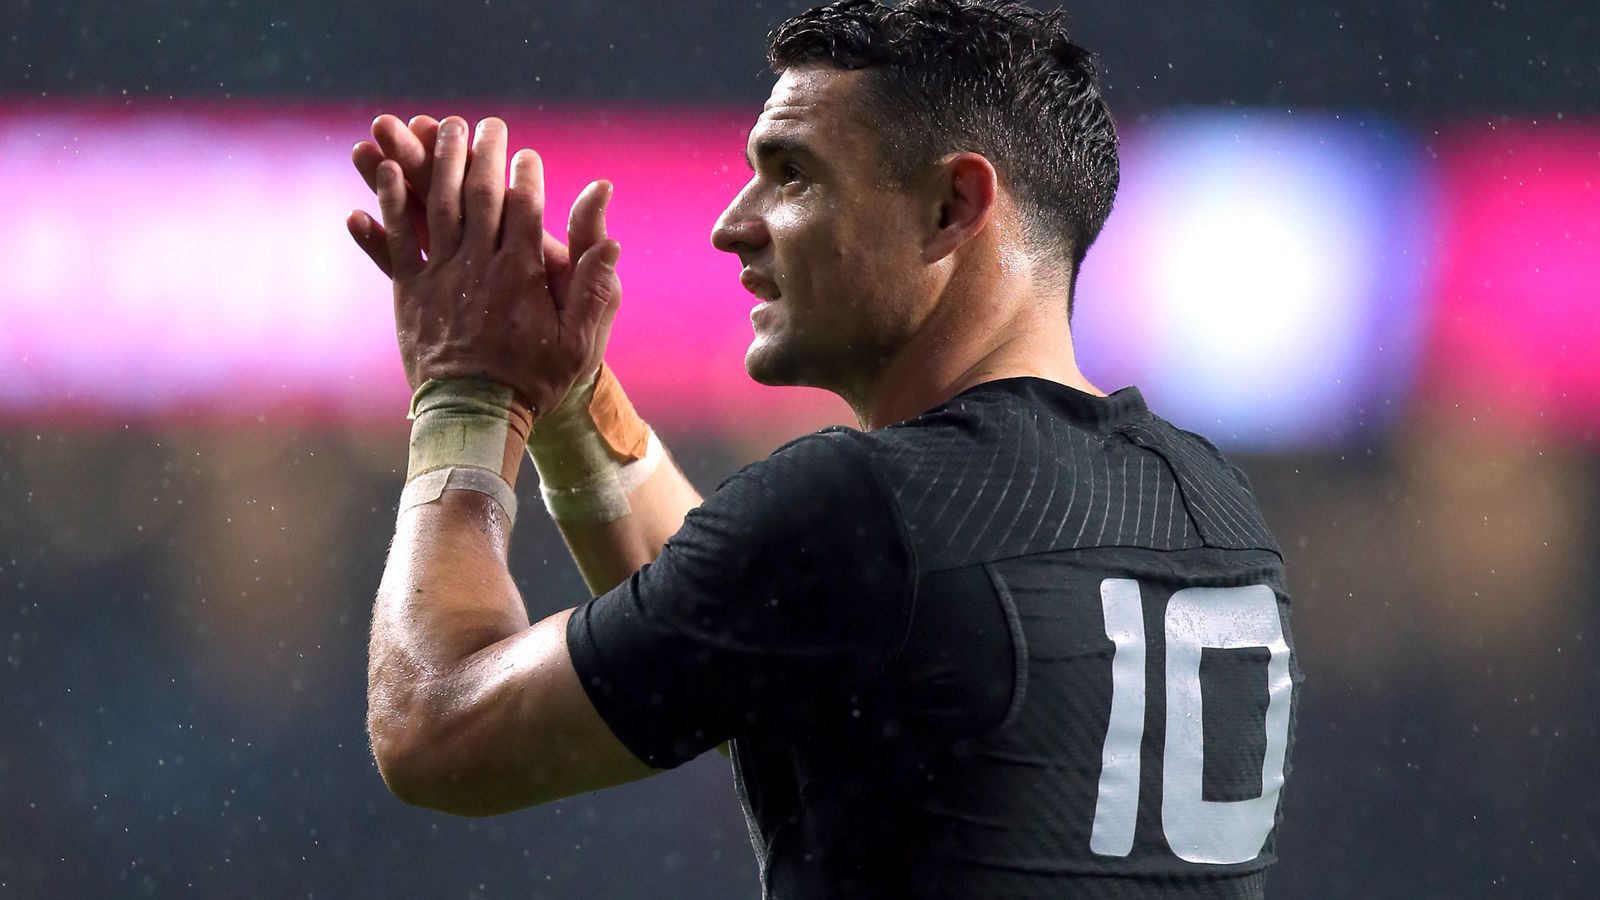 Exclusive: Dan Carter has taken time off to party, but All Blacks